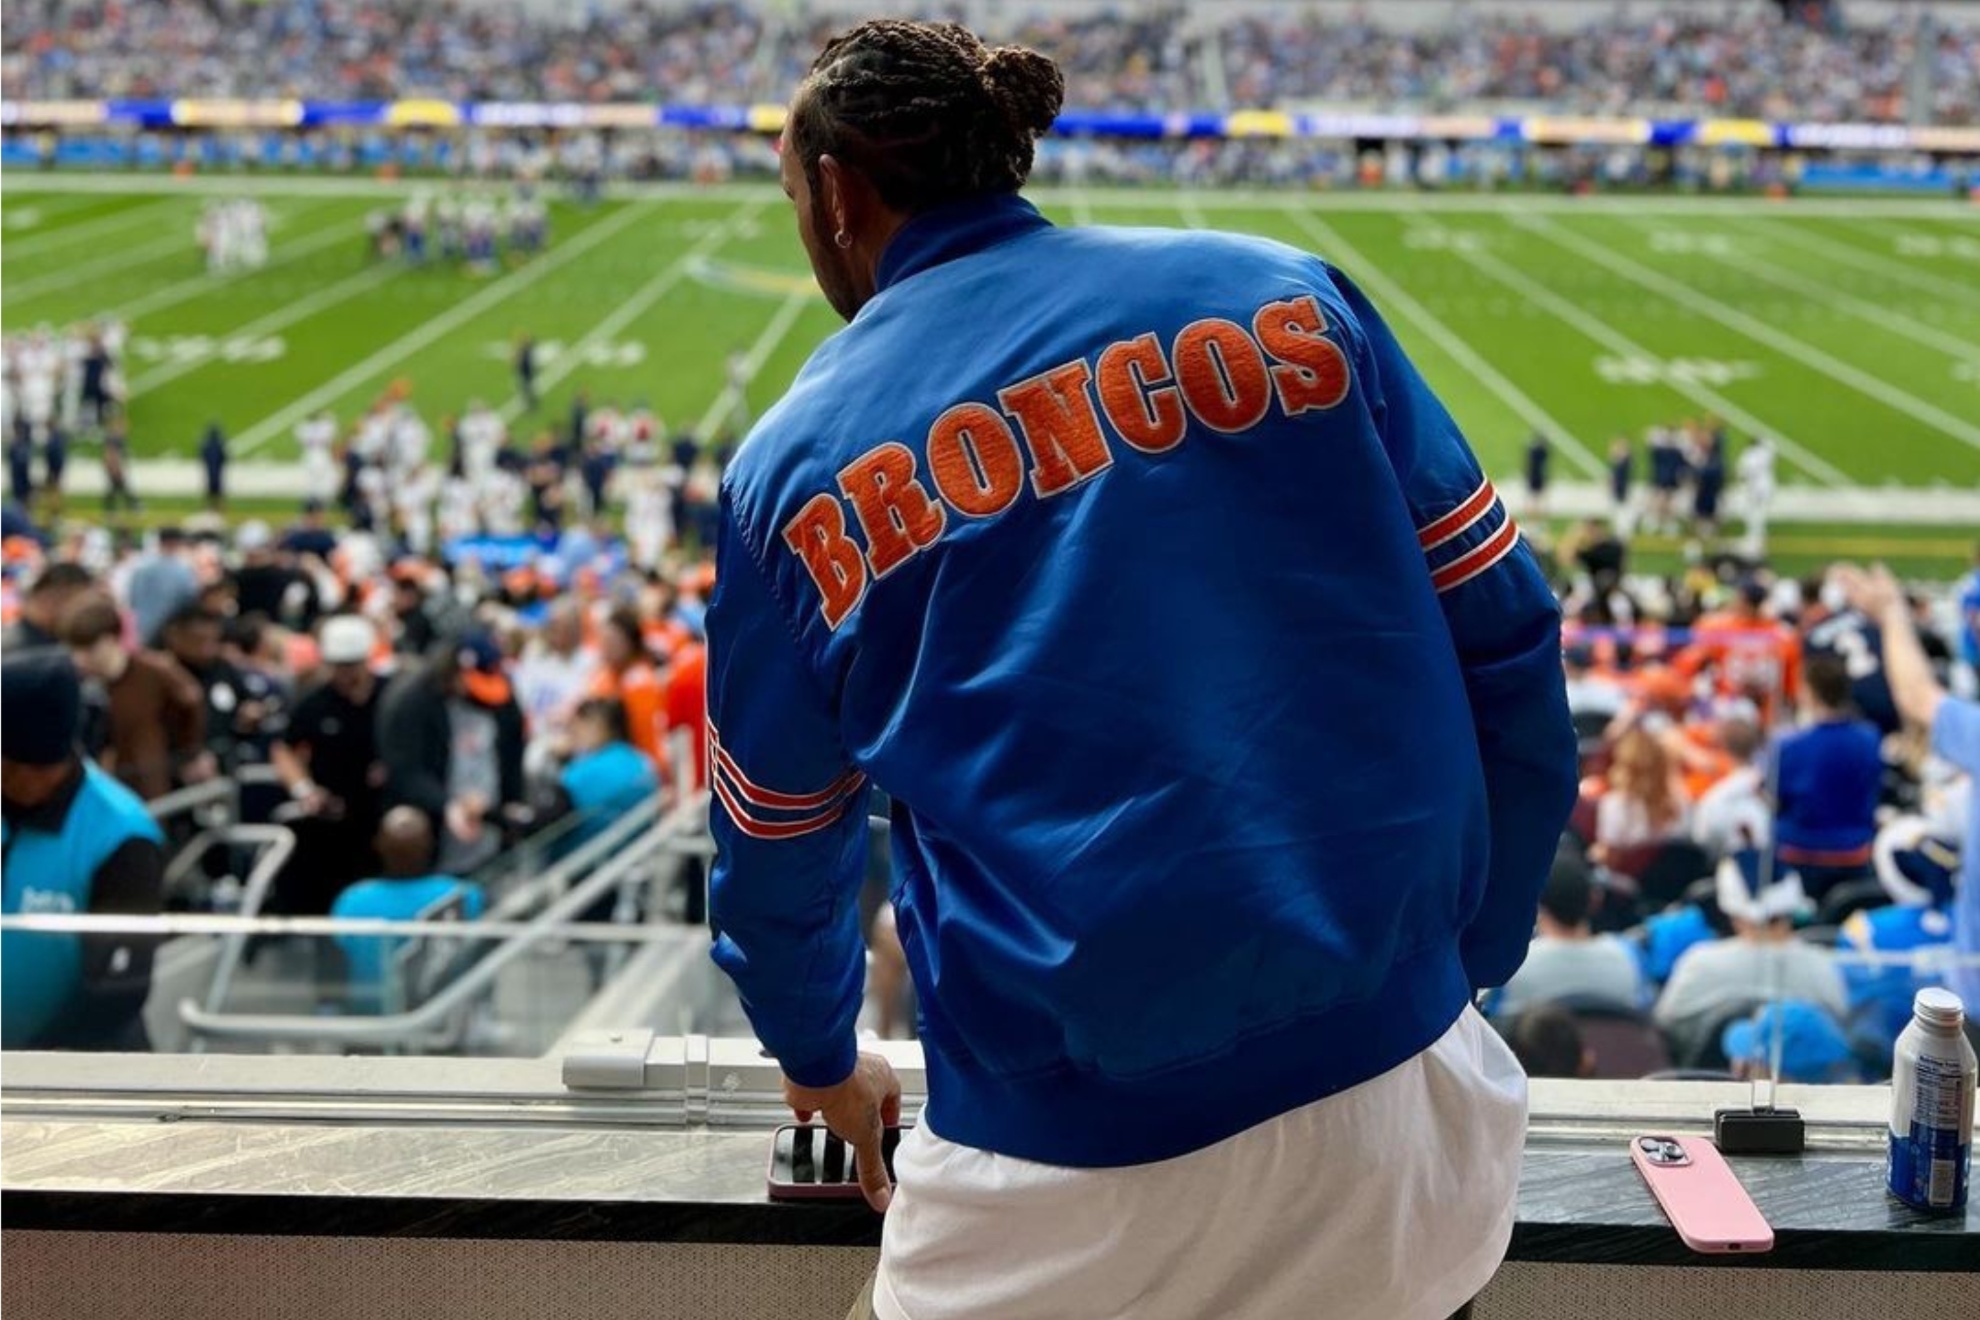 Formula 1 legend Lewis Hamilton at the Broncos-Chargers game.